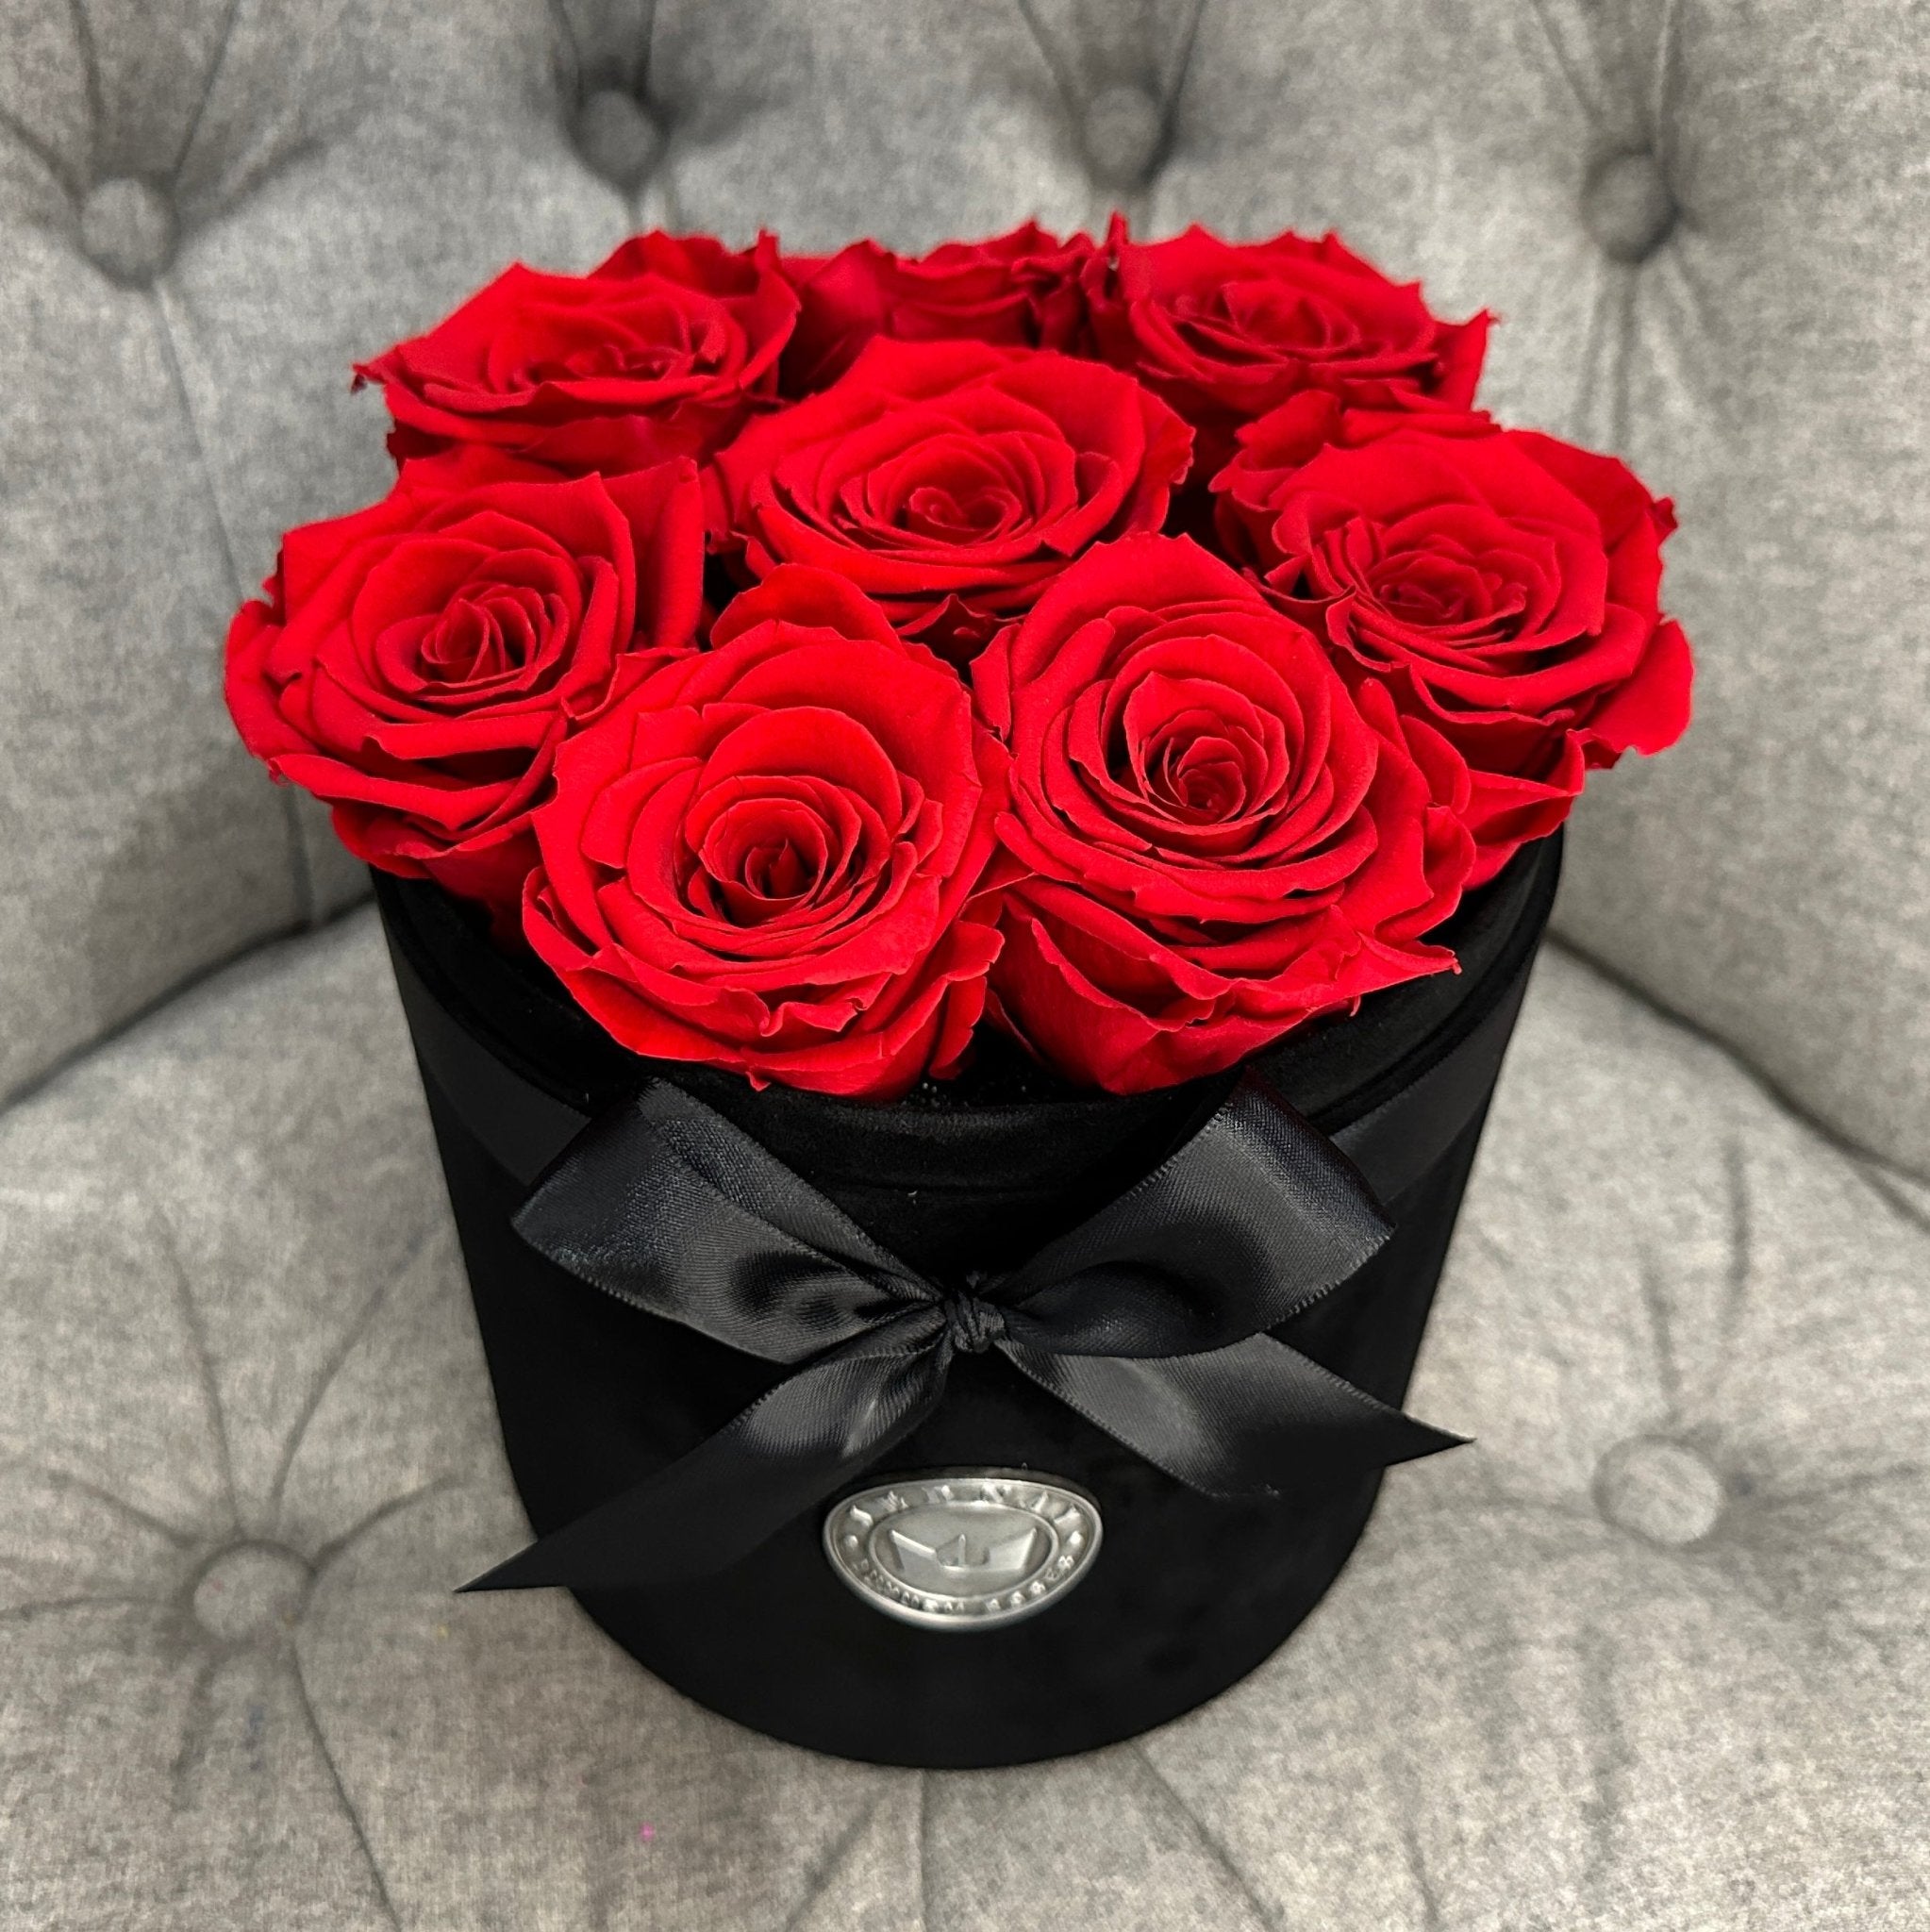 Medium Black Suede Forever Rose Box - Classic Red Eternal Roses - Jednay Roses